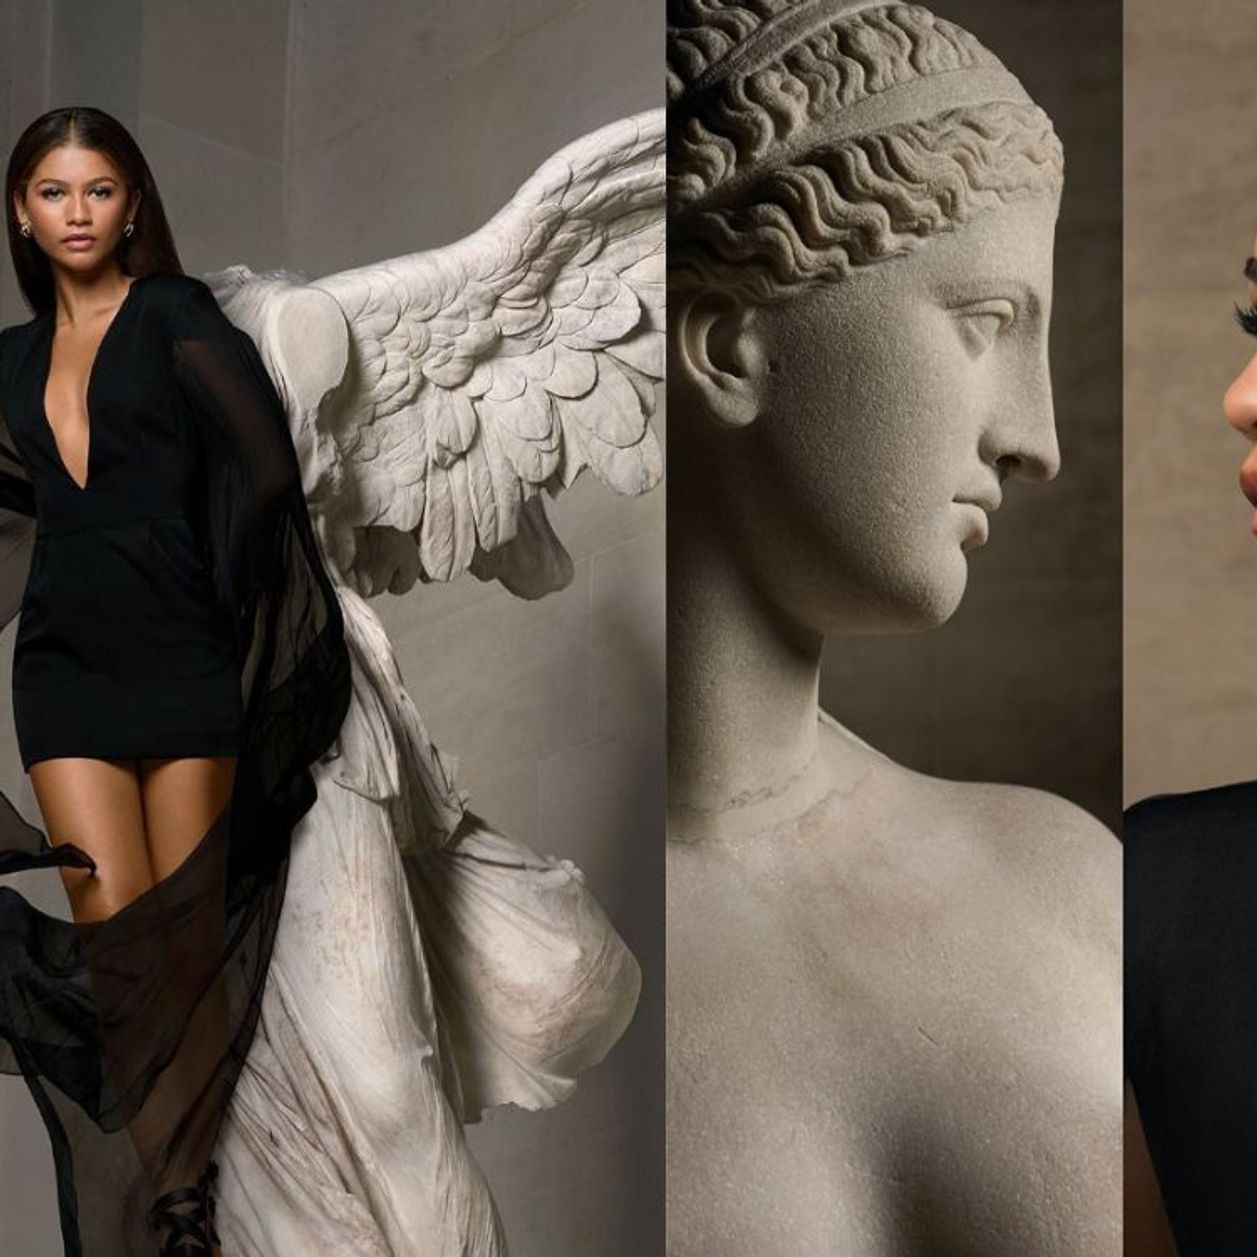 Zendaya shines in the Lancôme campaign at the Louvre Museum on her 27th birthday